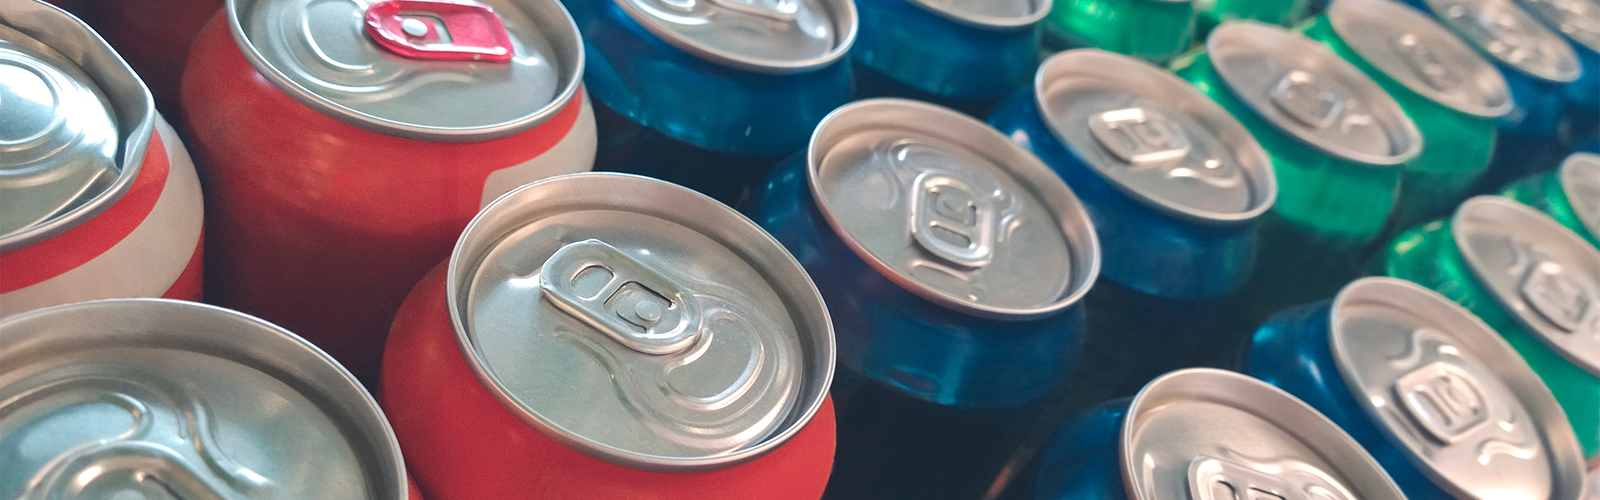 Are Tin Cans the Same as Aluminum Cans?